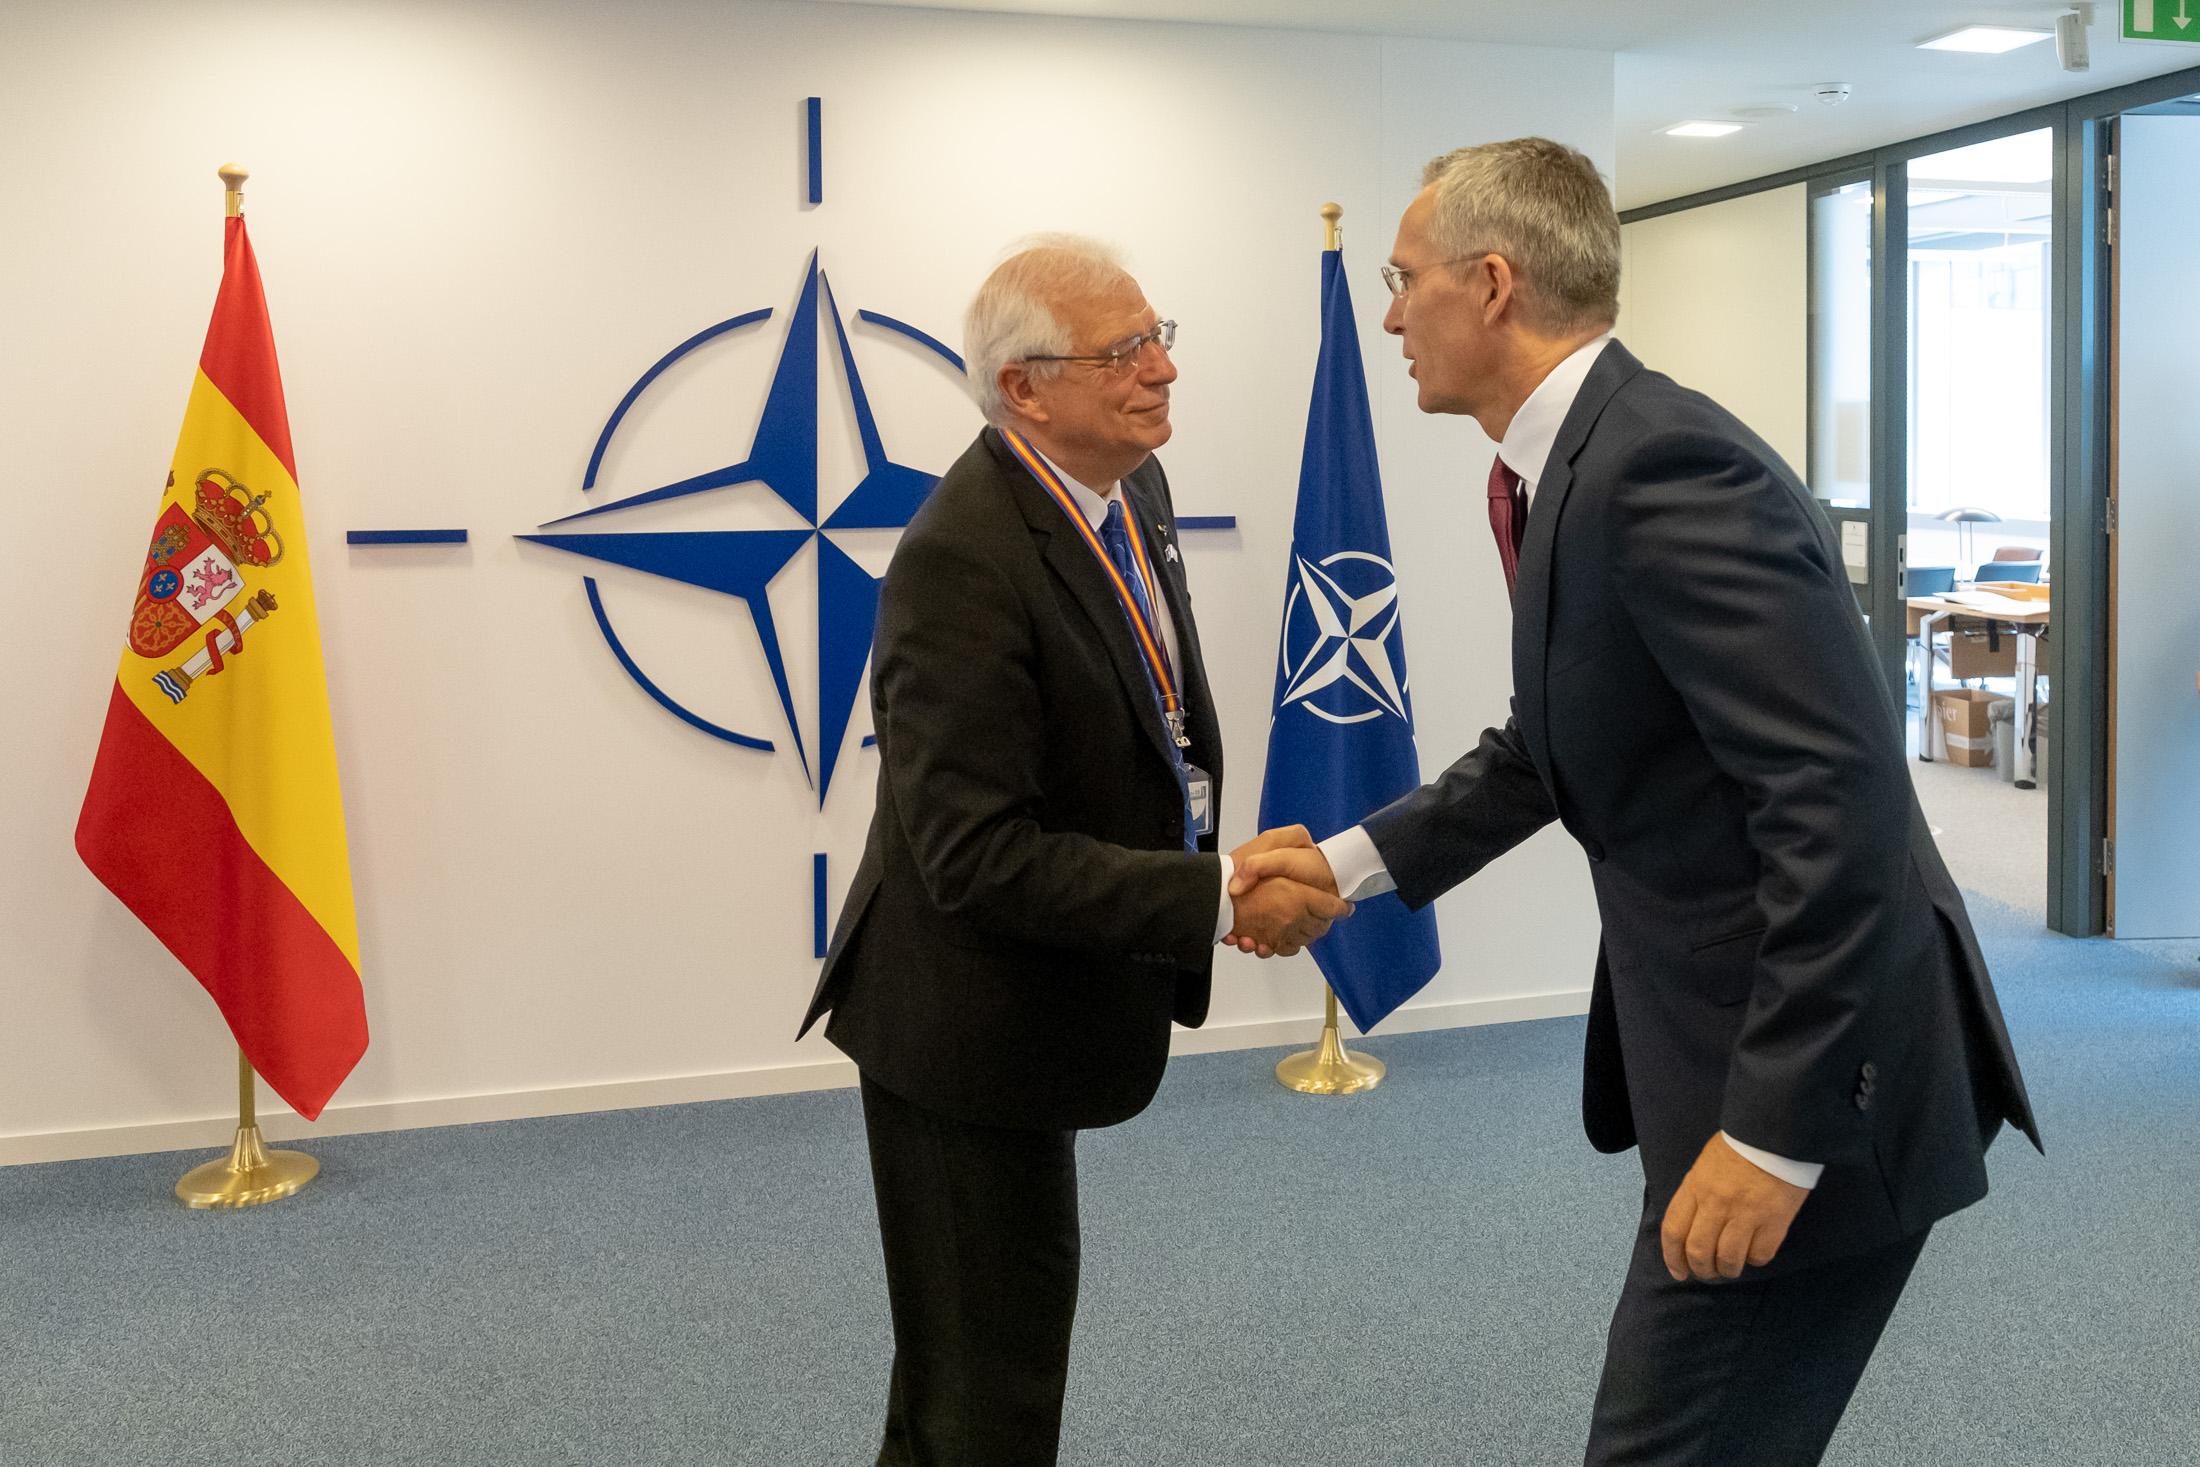 EuropaPress 2232741 HANDOUT   26 June 2019 Belgium Brussels NATO Secretary General Jens Stoltenberg (R) shakes hands with Spanish Foreign Minister Josep Borrell on the sidelines of NATO Defence Ministers meetin (1)